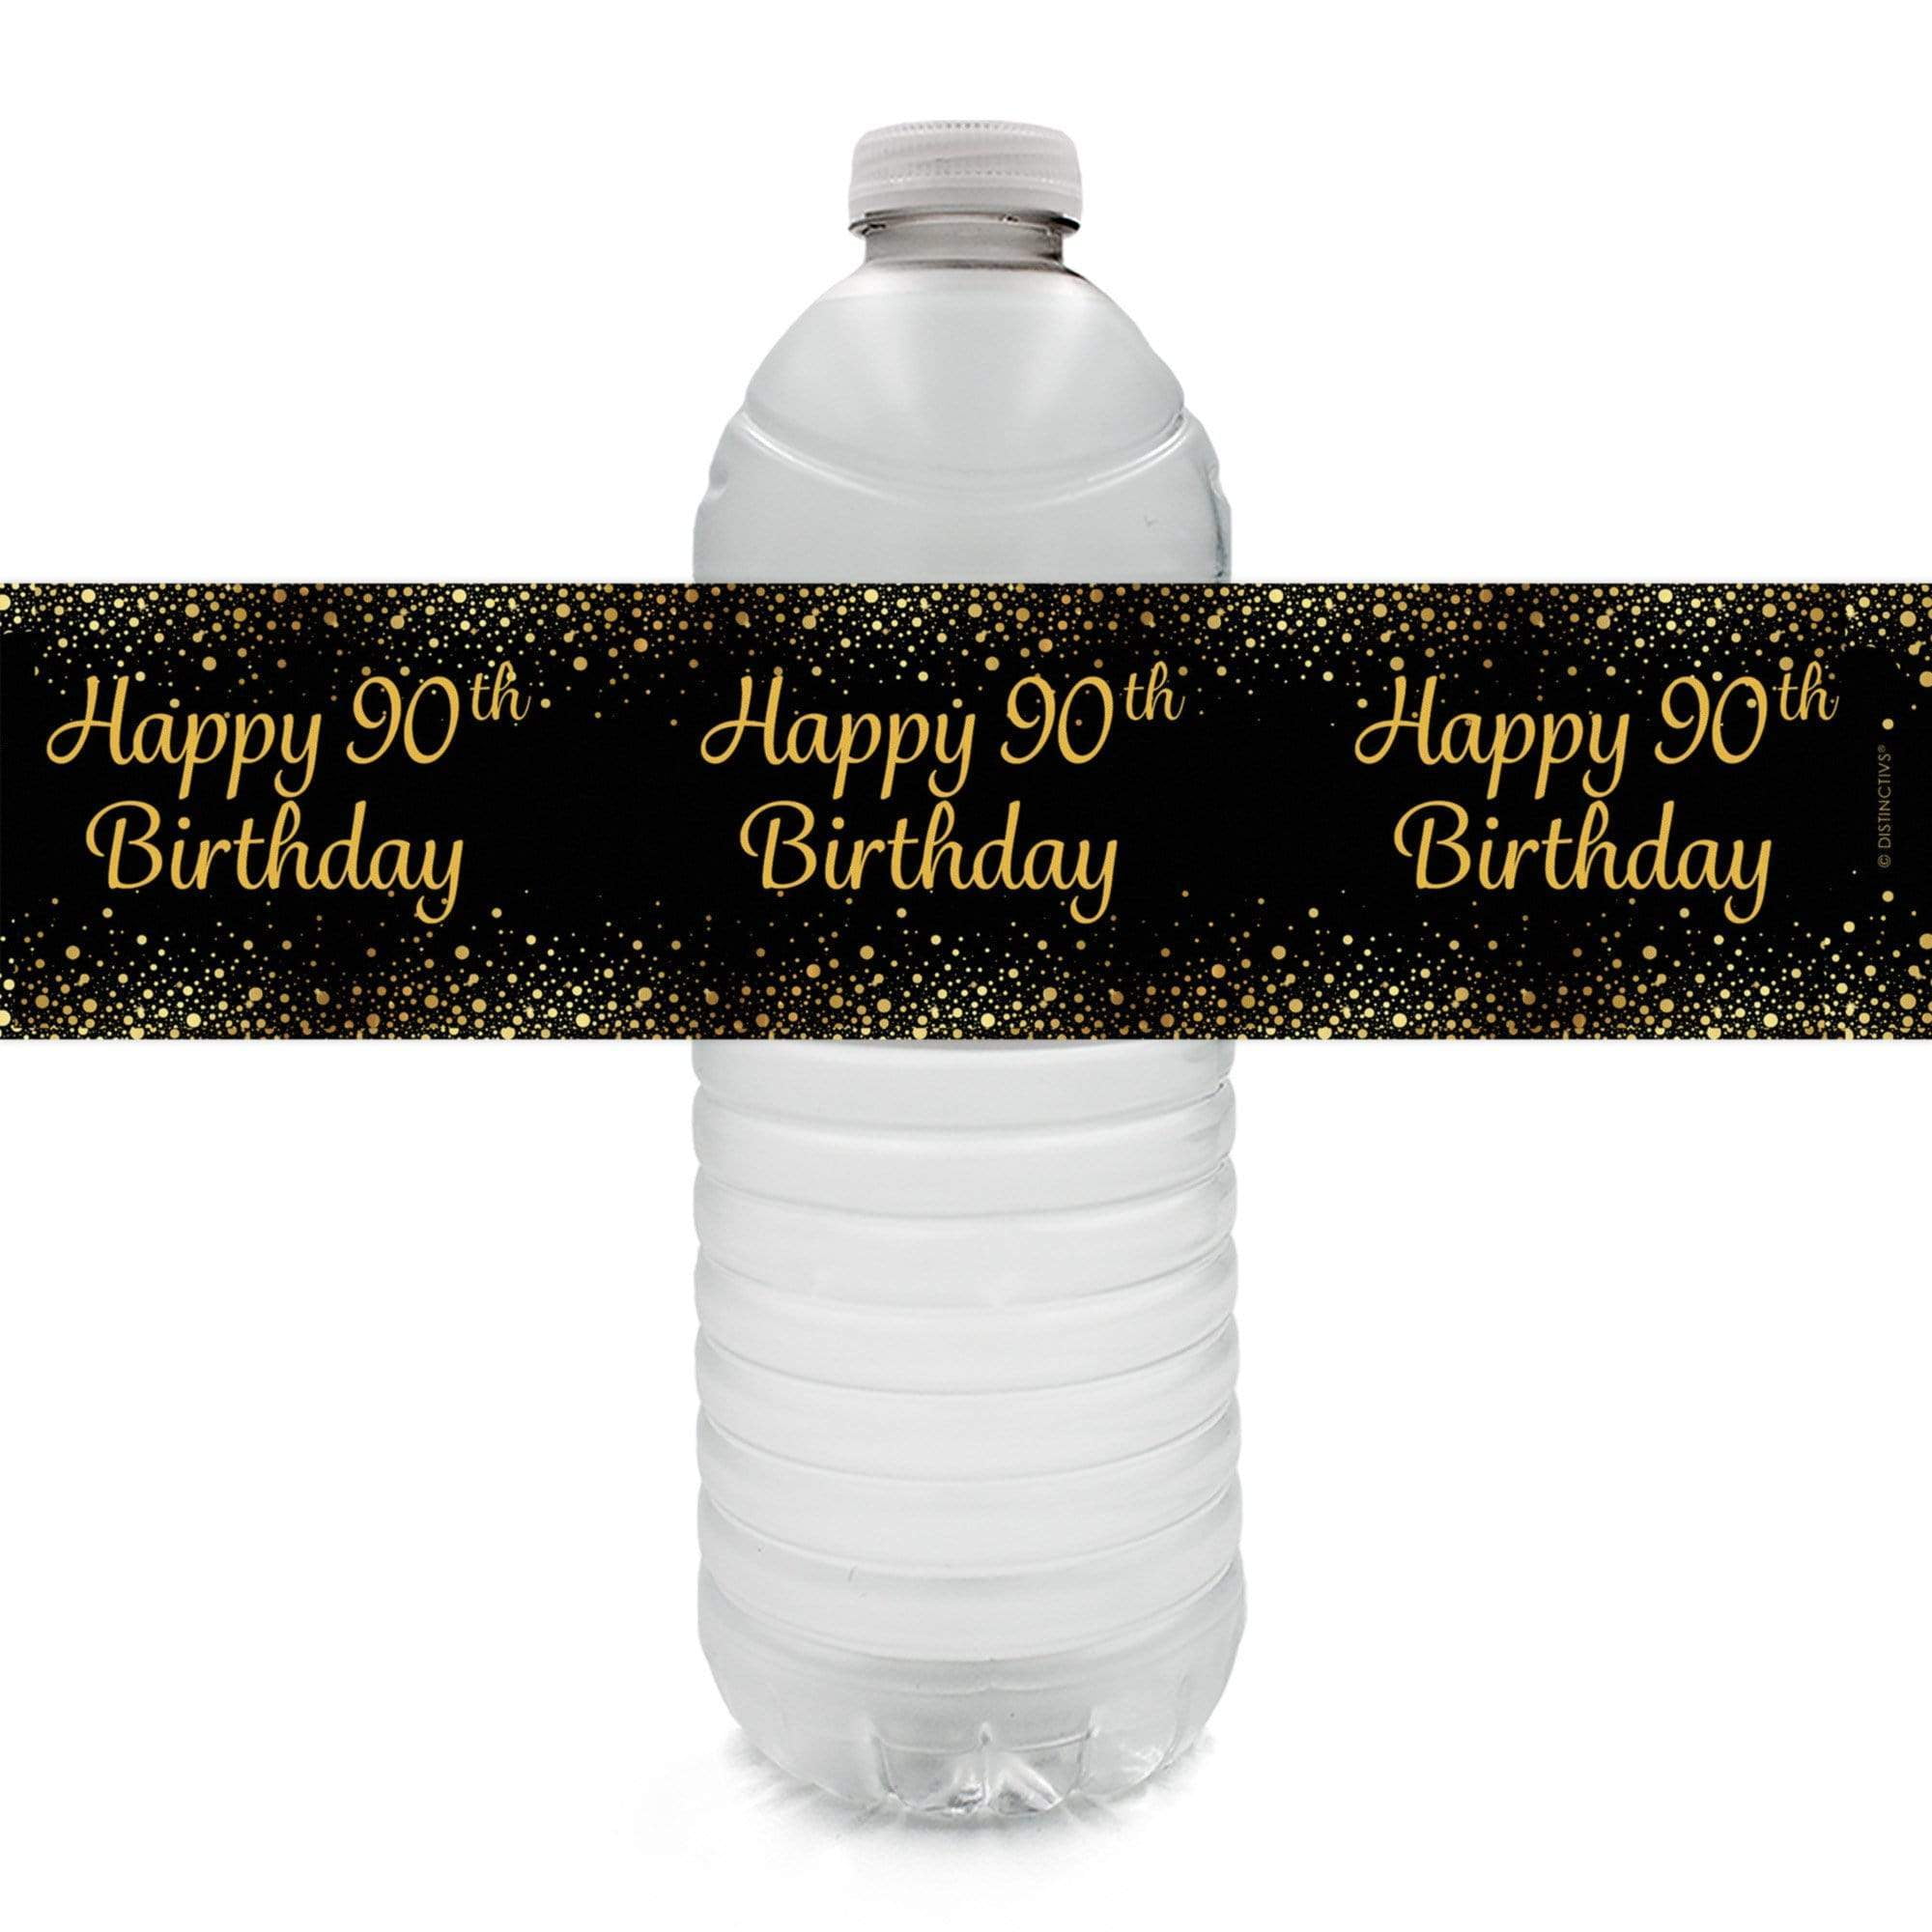 Set of 25 Birthday Personalized Waterproof Party Favor Water Bottle Labels 8"x2" 